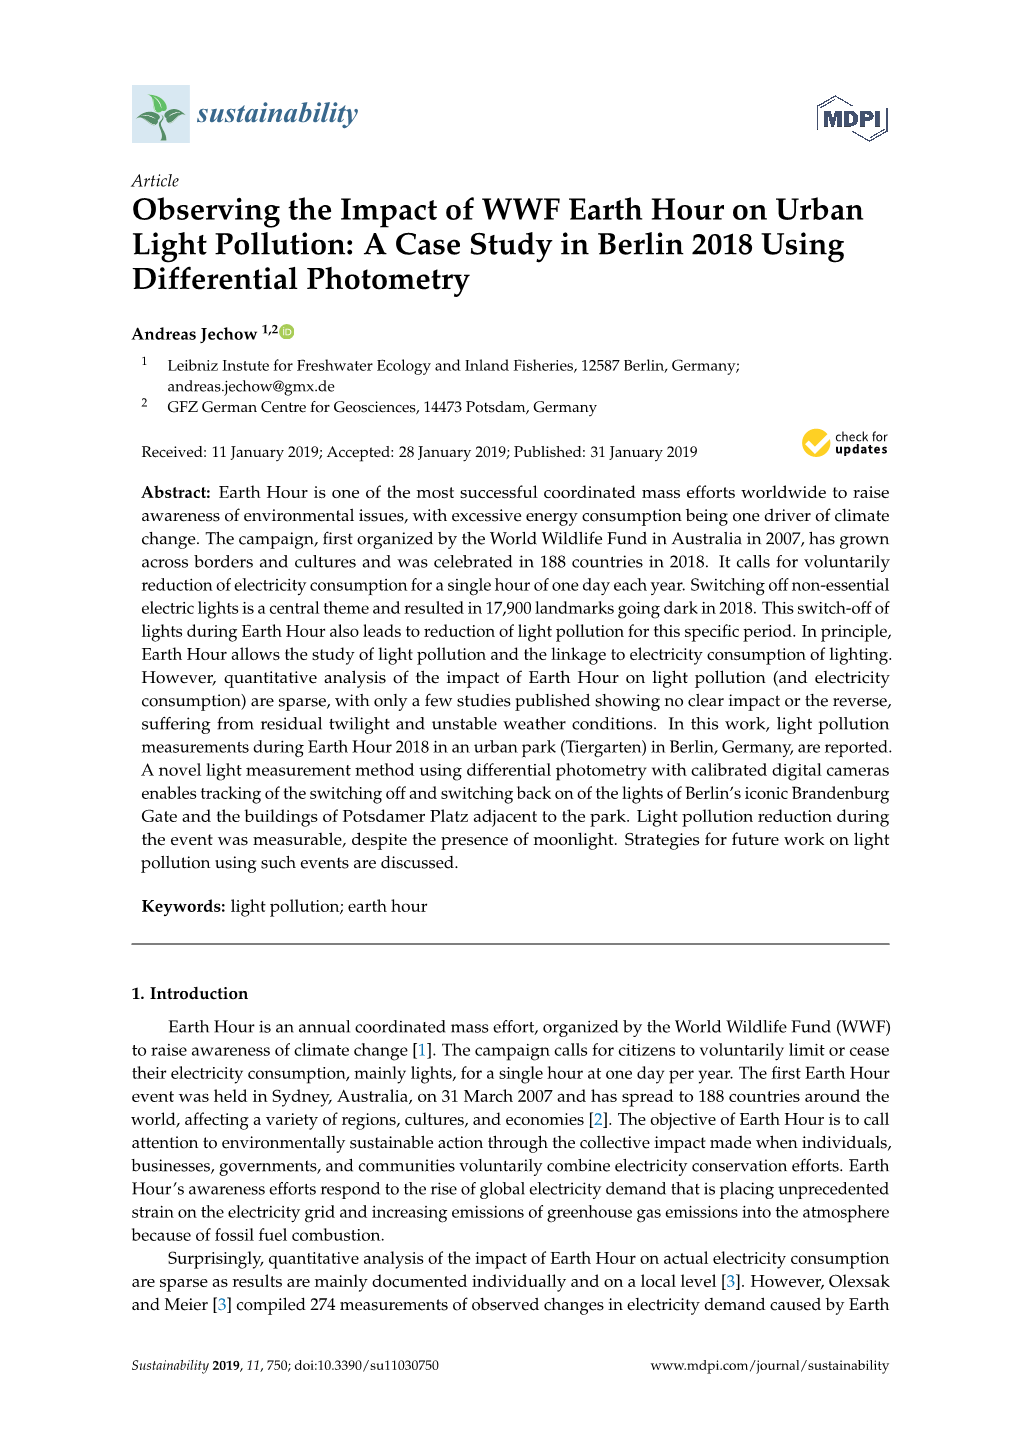 Observing the Impact of WWF Earth Hour on Urban Light Pollution: a Case Study in Berlin 2018 Using Differential Photometry